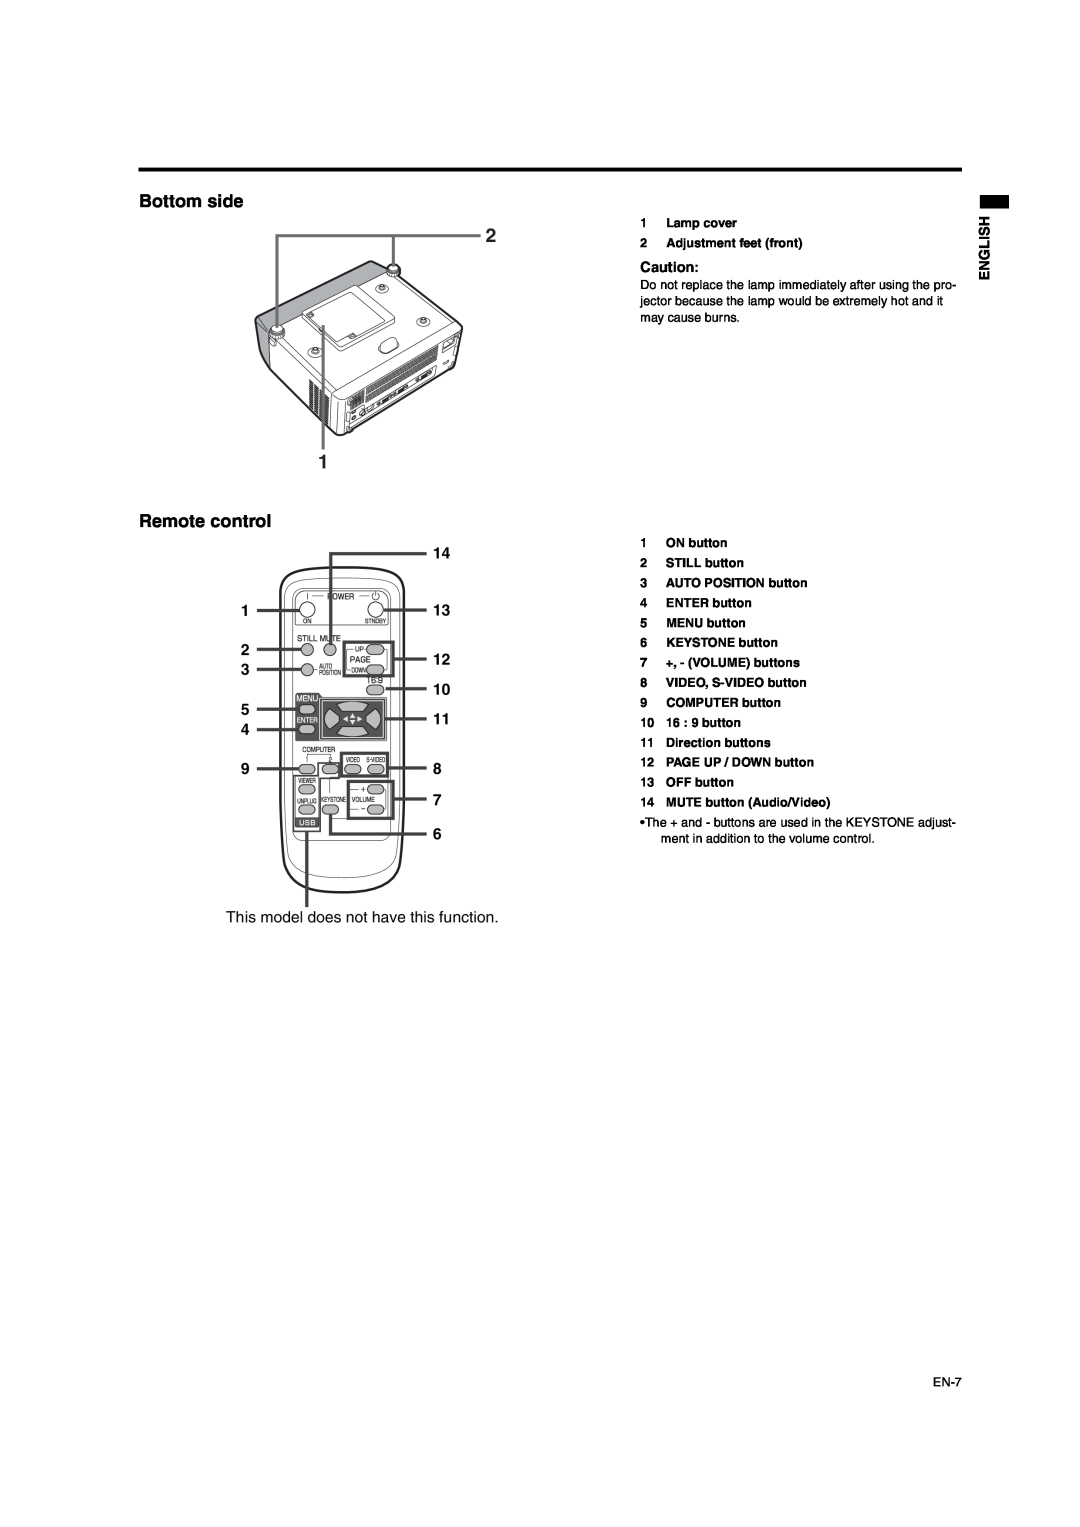 Mitsumi electronic XD206U user manual Bottom side Remote control, This model does not have this function, English 